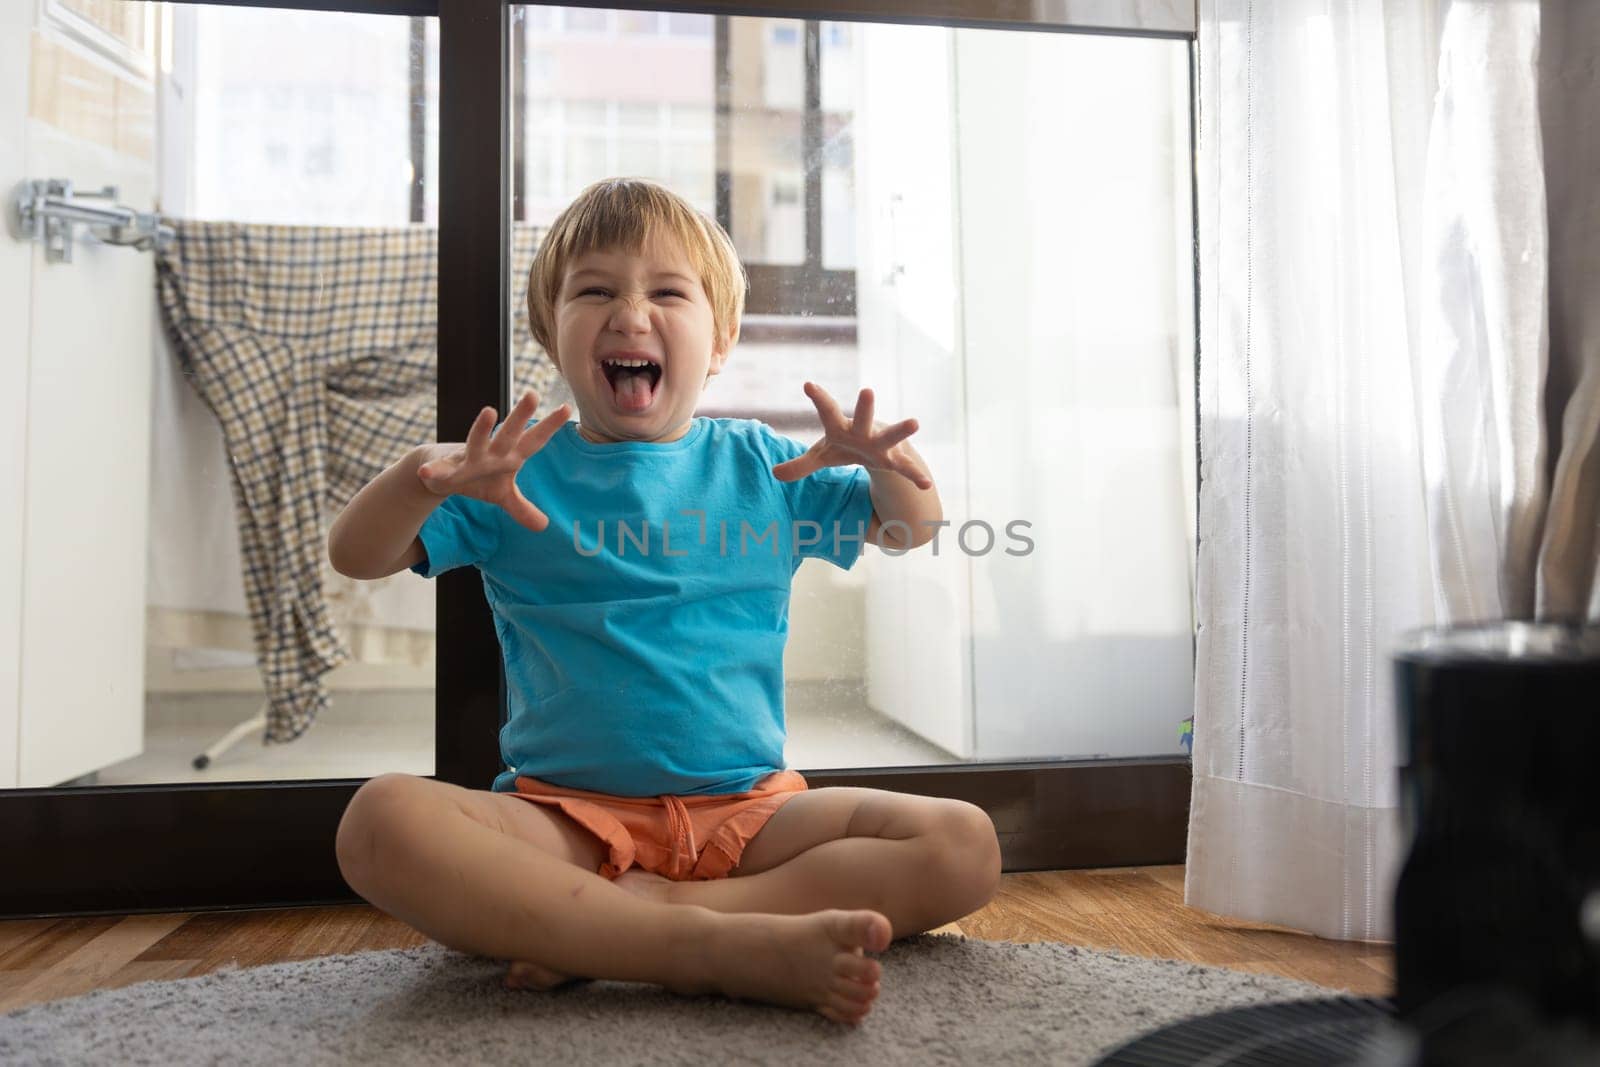 A little boy sitting on the floor with his hands in the air